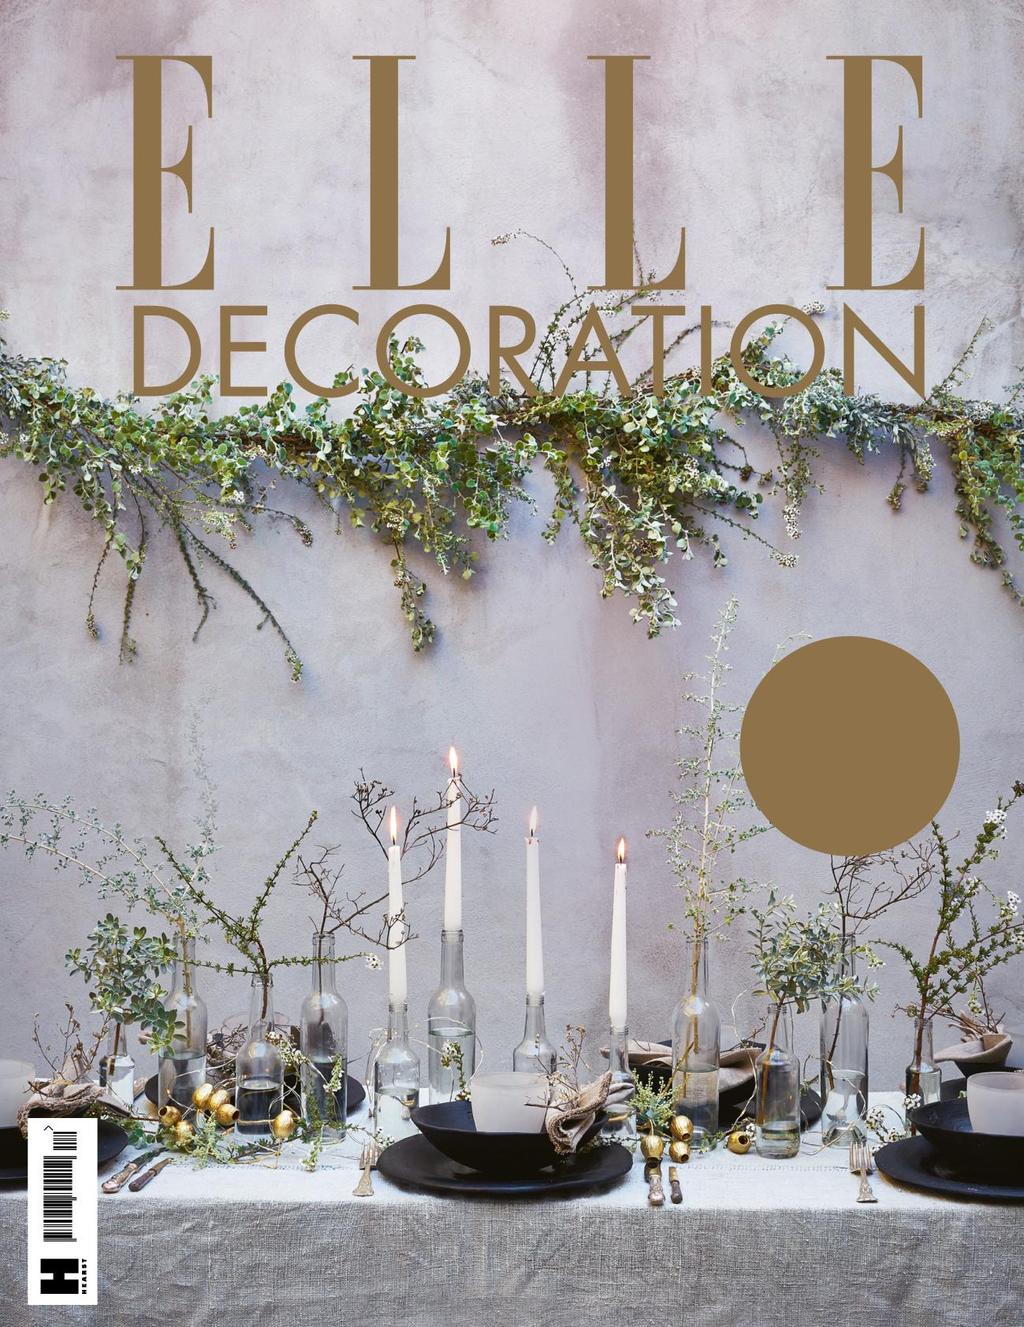 THE STYLE MAGAZINE FOR YOUR HOME DECEMBER 2017 4.50 Festive glamour HOW TO CELEBRATE IN STYLE PLUS, 87 GIFTS FOR DESIGN LOVERS MAXIMALIST OR MINIMALIST?